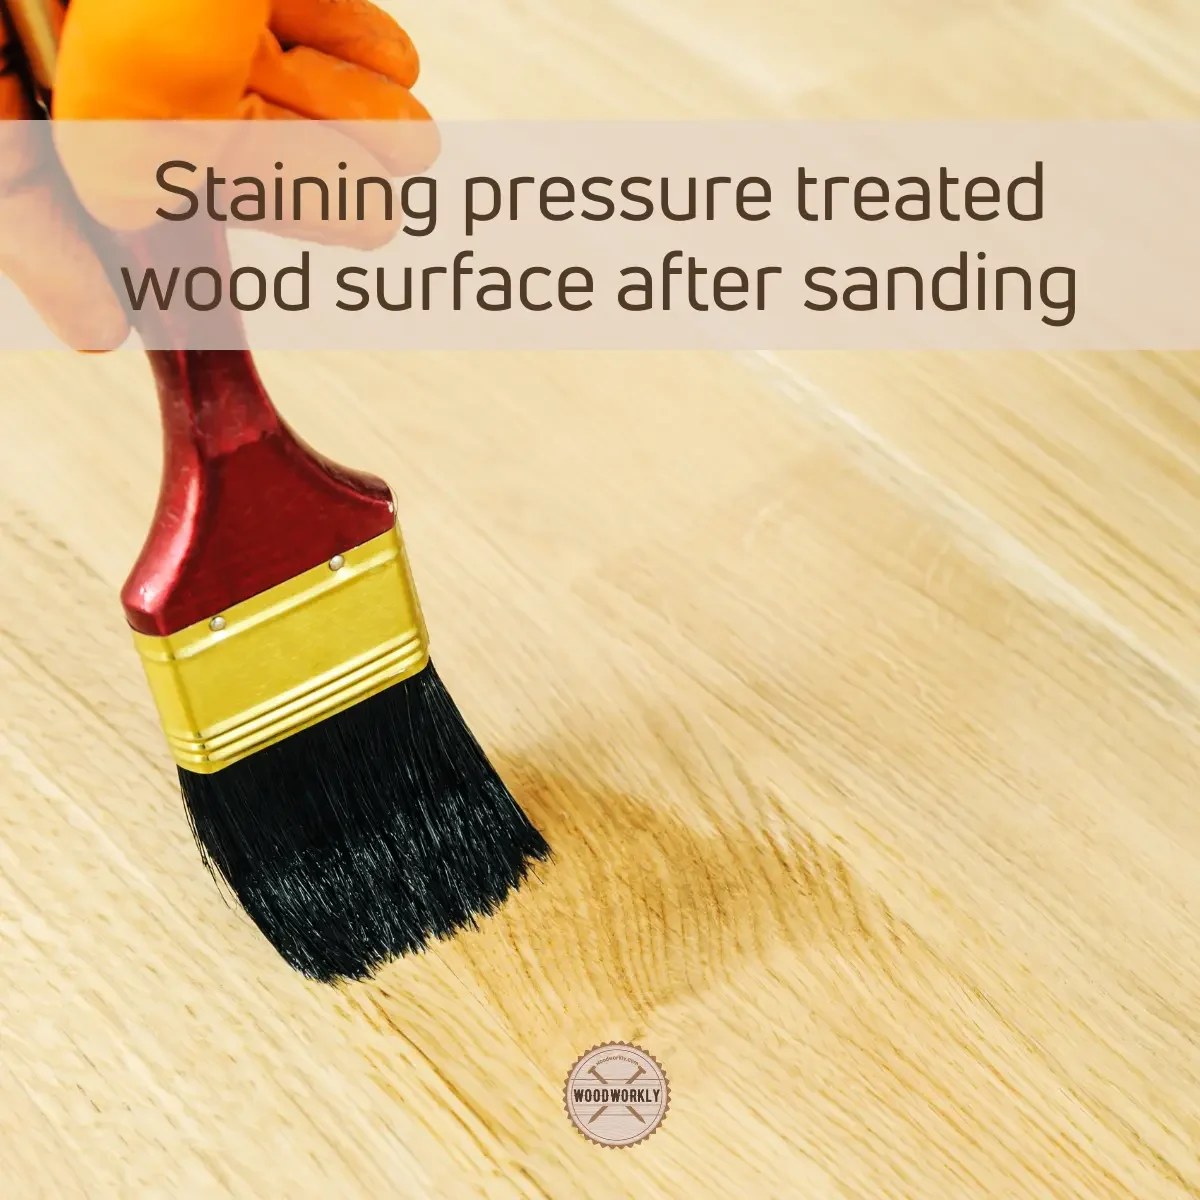 Staining pressure treated wood surface after sanding